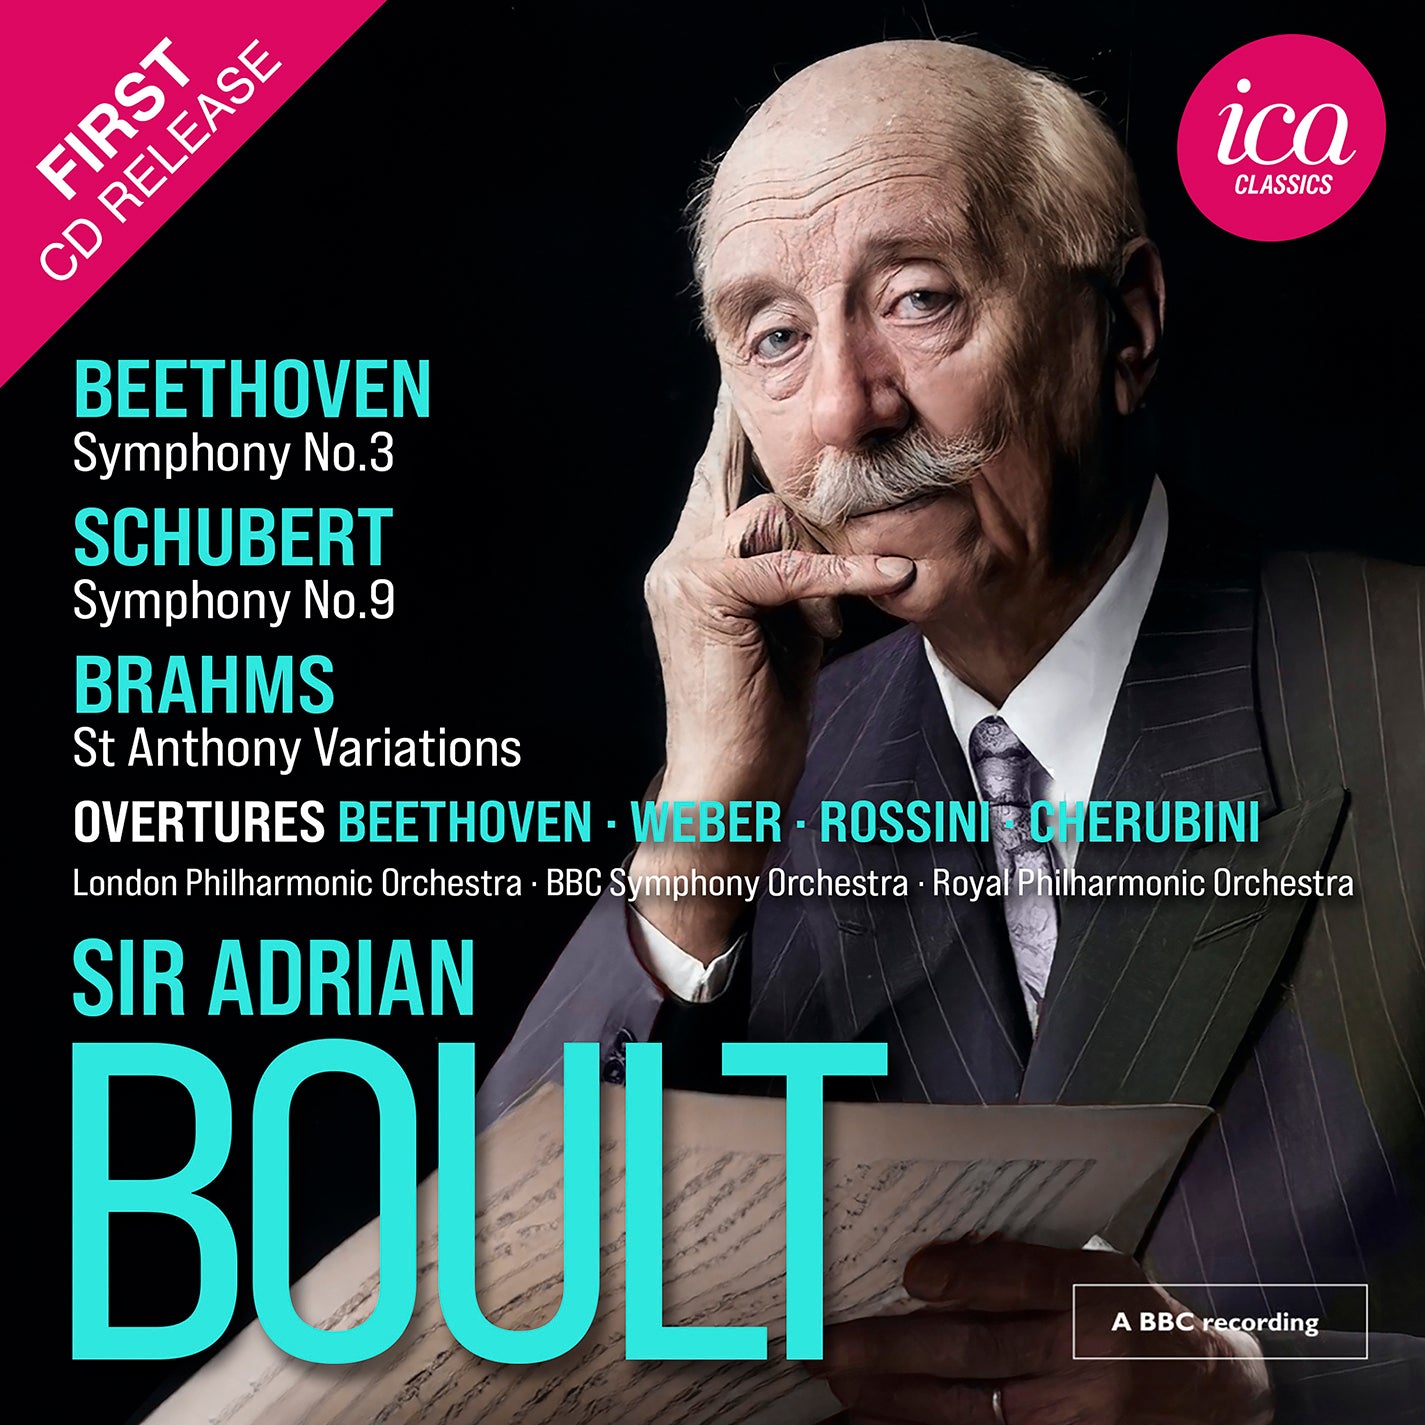 Andrian Boult Conducts Beethoven, Schubert, & Brahms